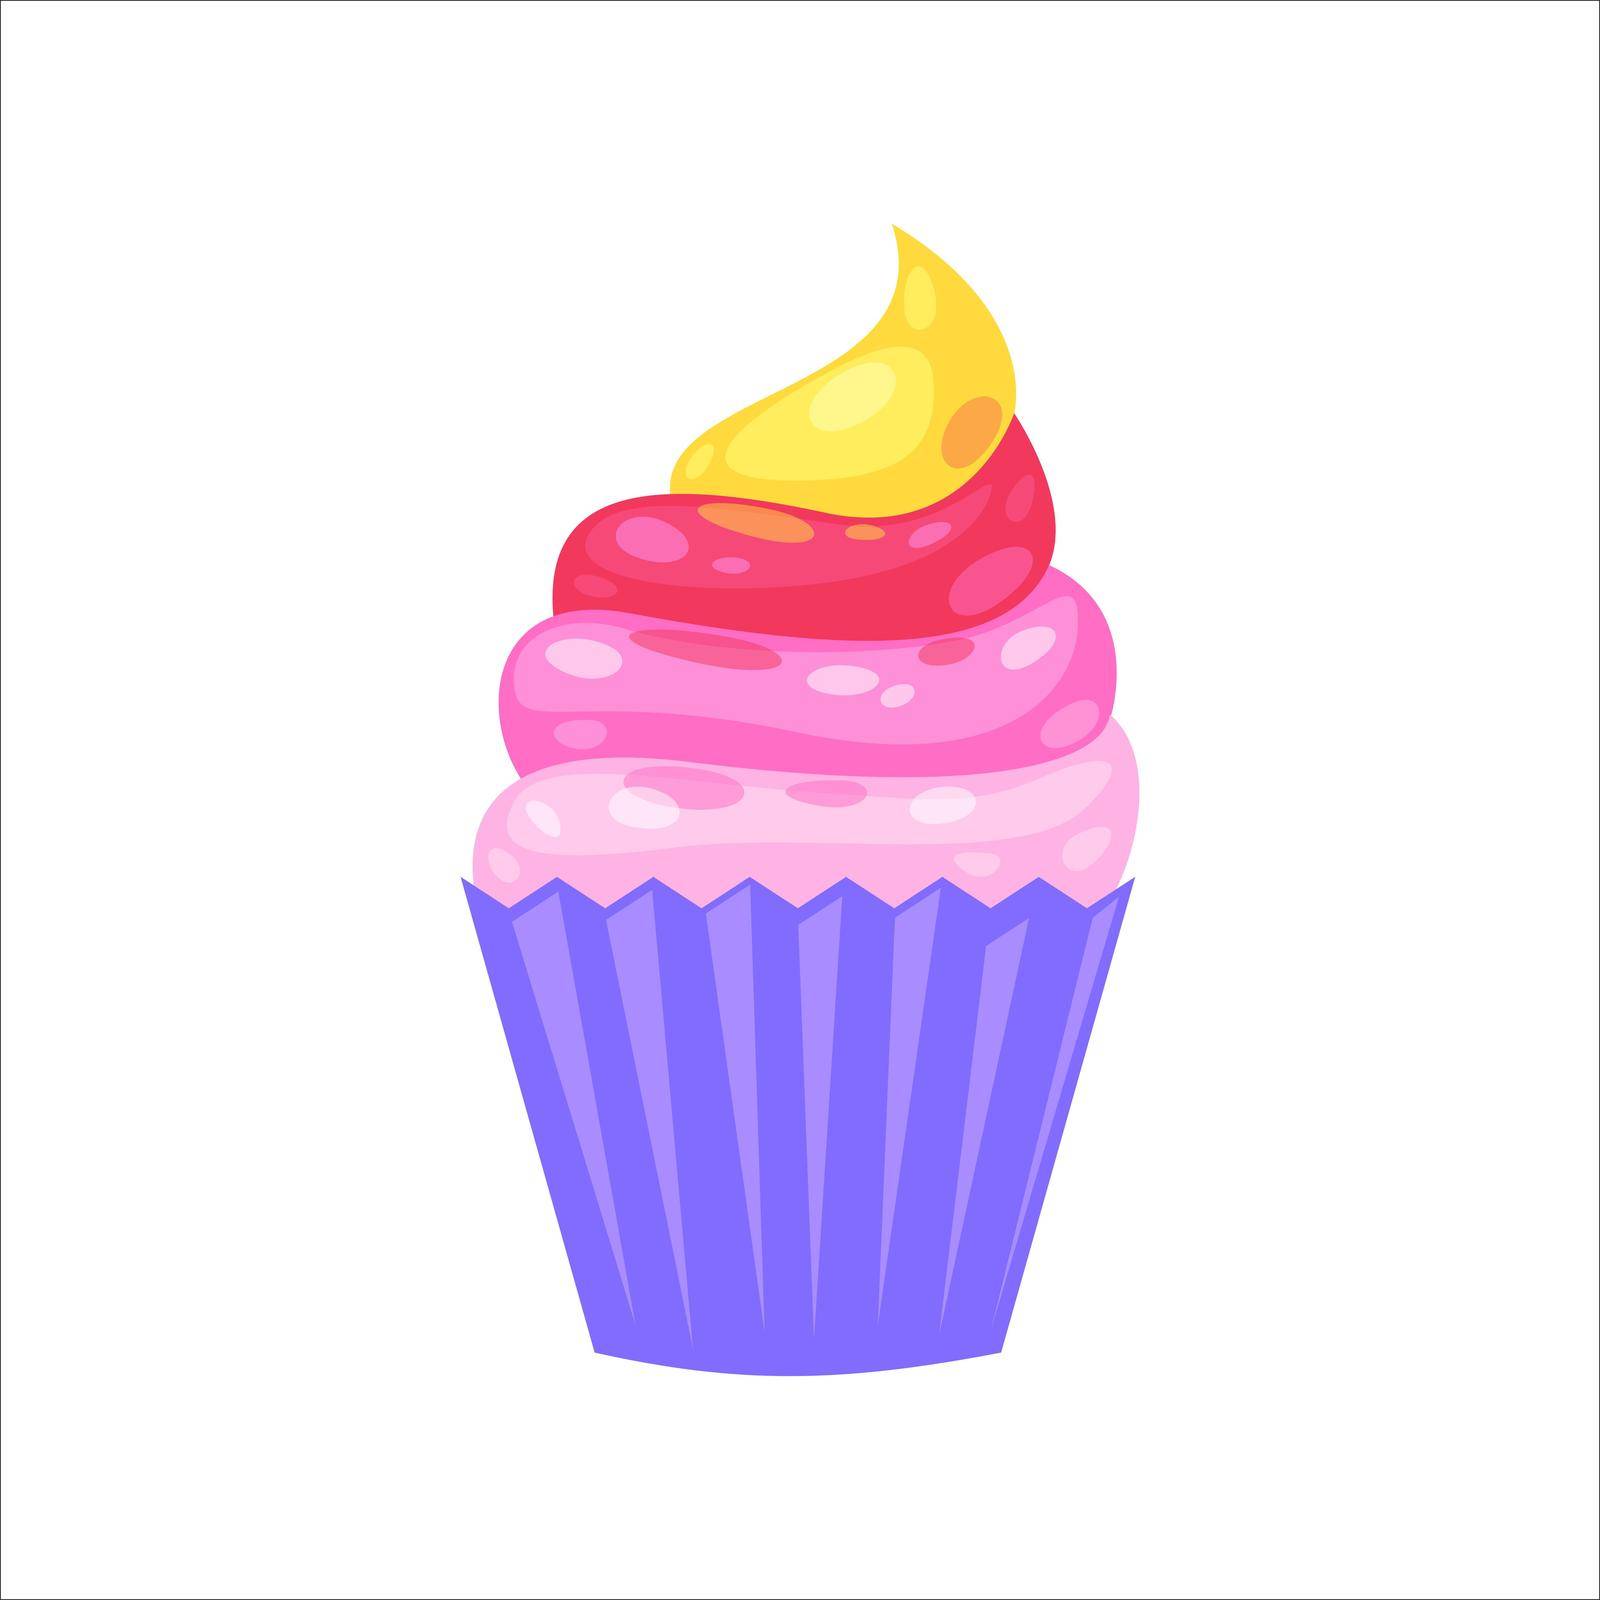 Cake in doodle style on white background.